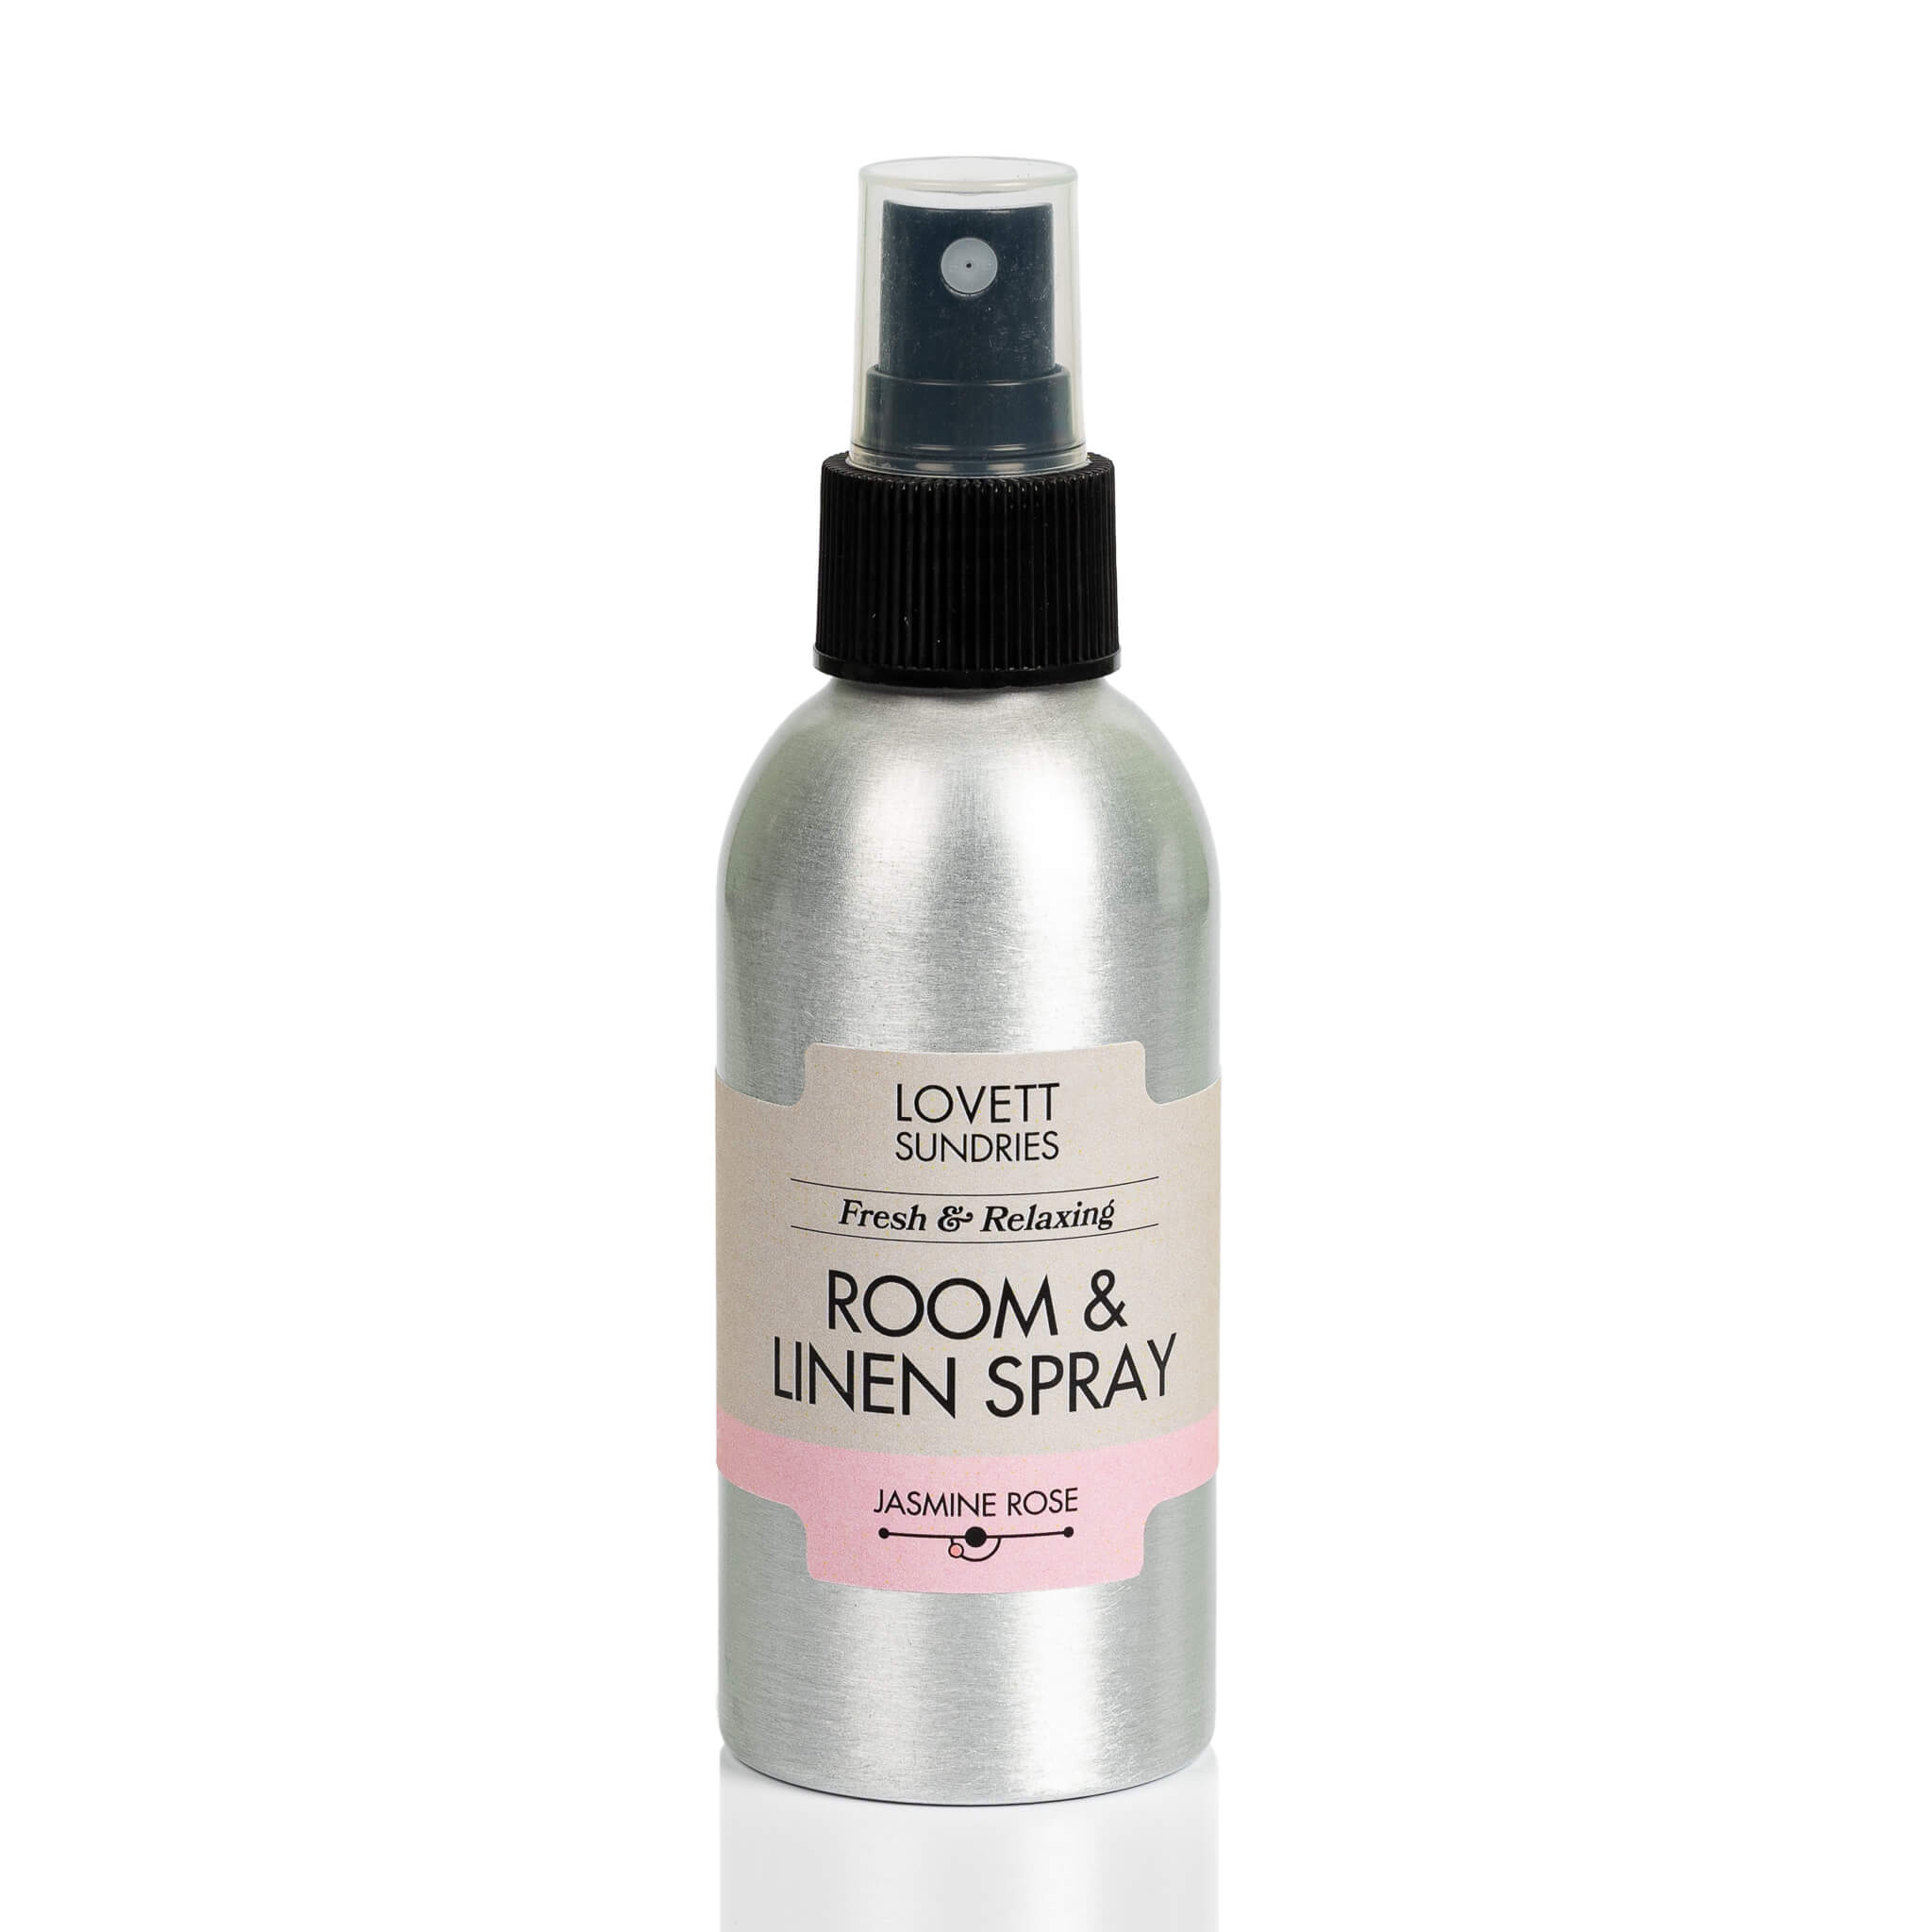 All natrual essential oil based jasmine rose scented room & linen spray in a recyclable aluminum bottle with a spray top. 